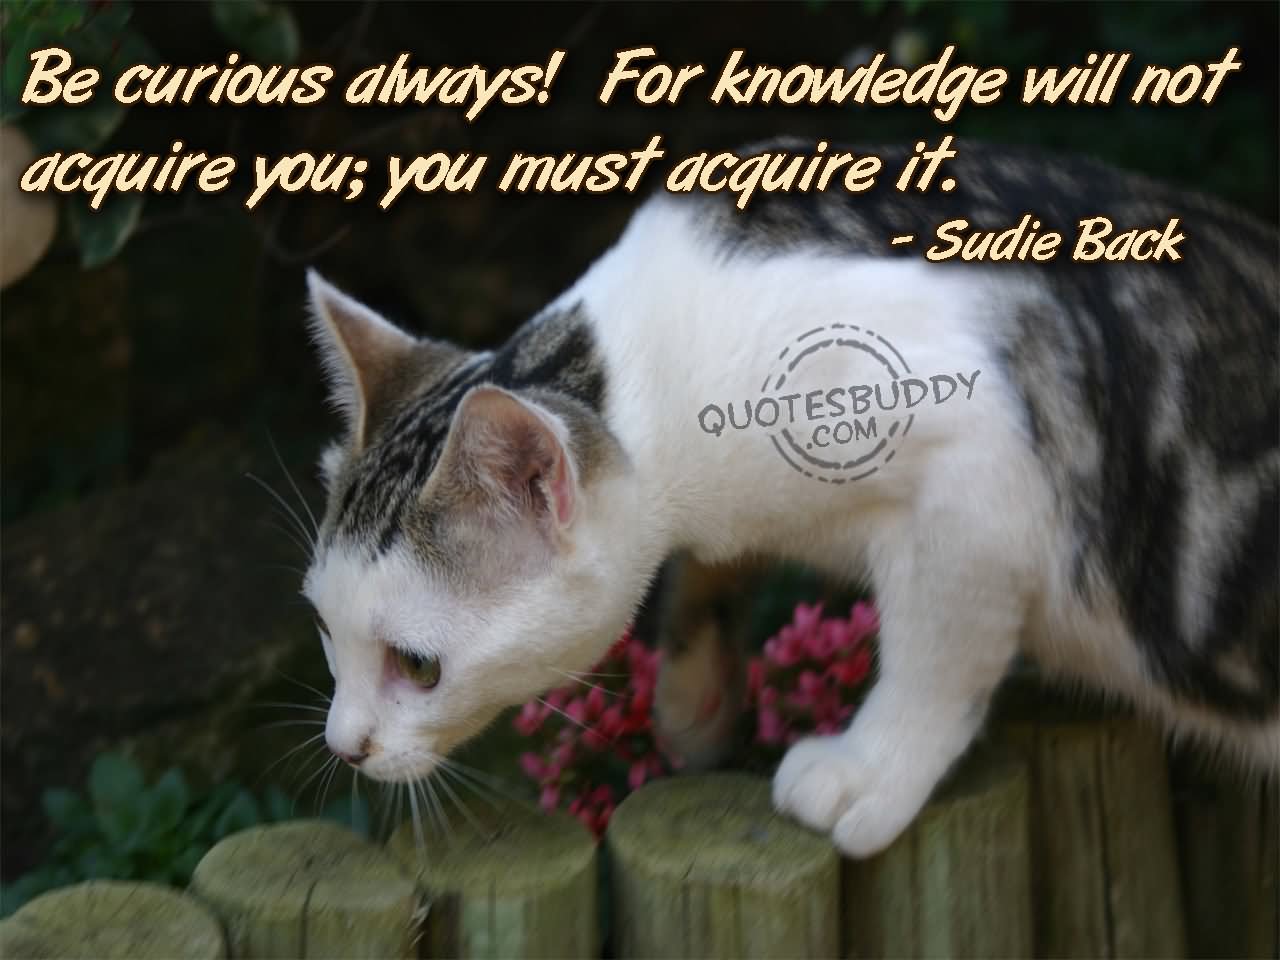 Be curious always! For knowledge will not acquire you: you must acquire it.